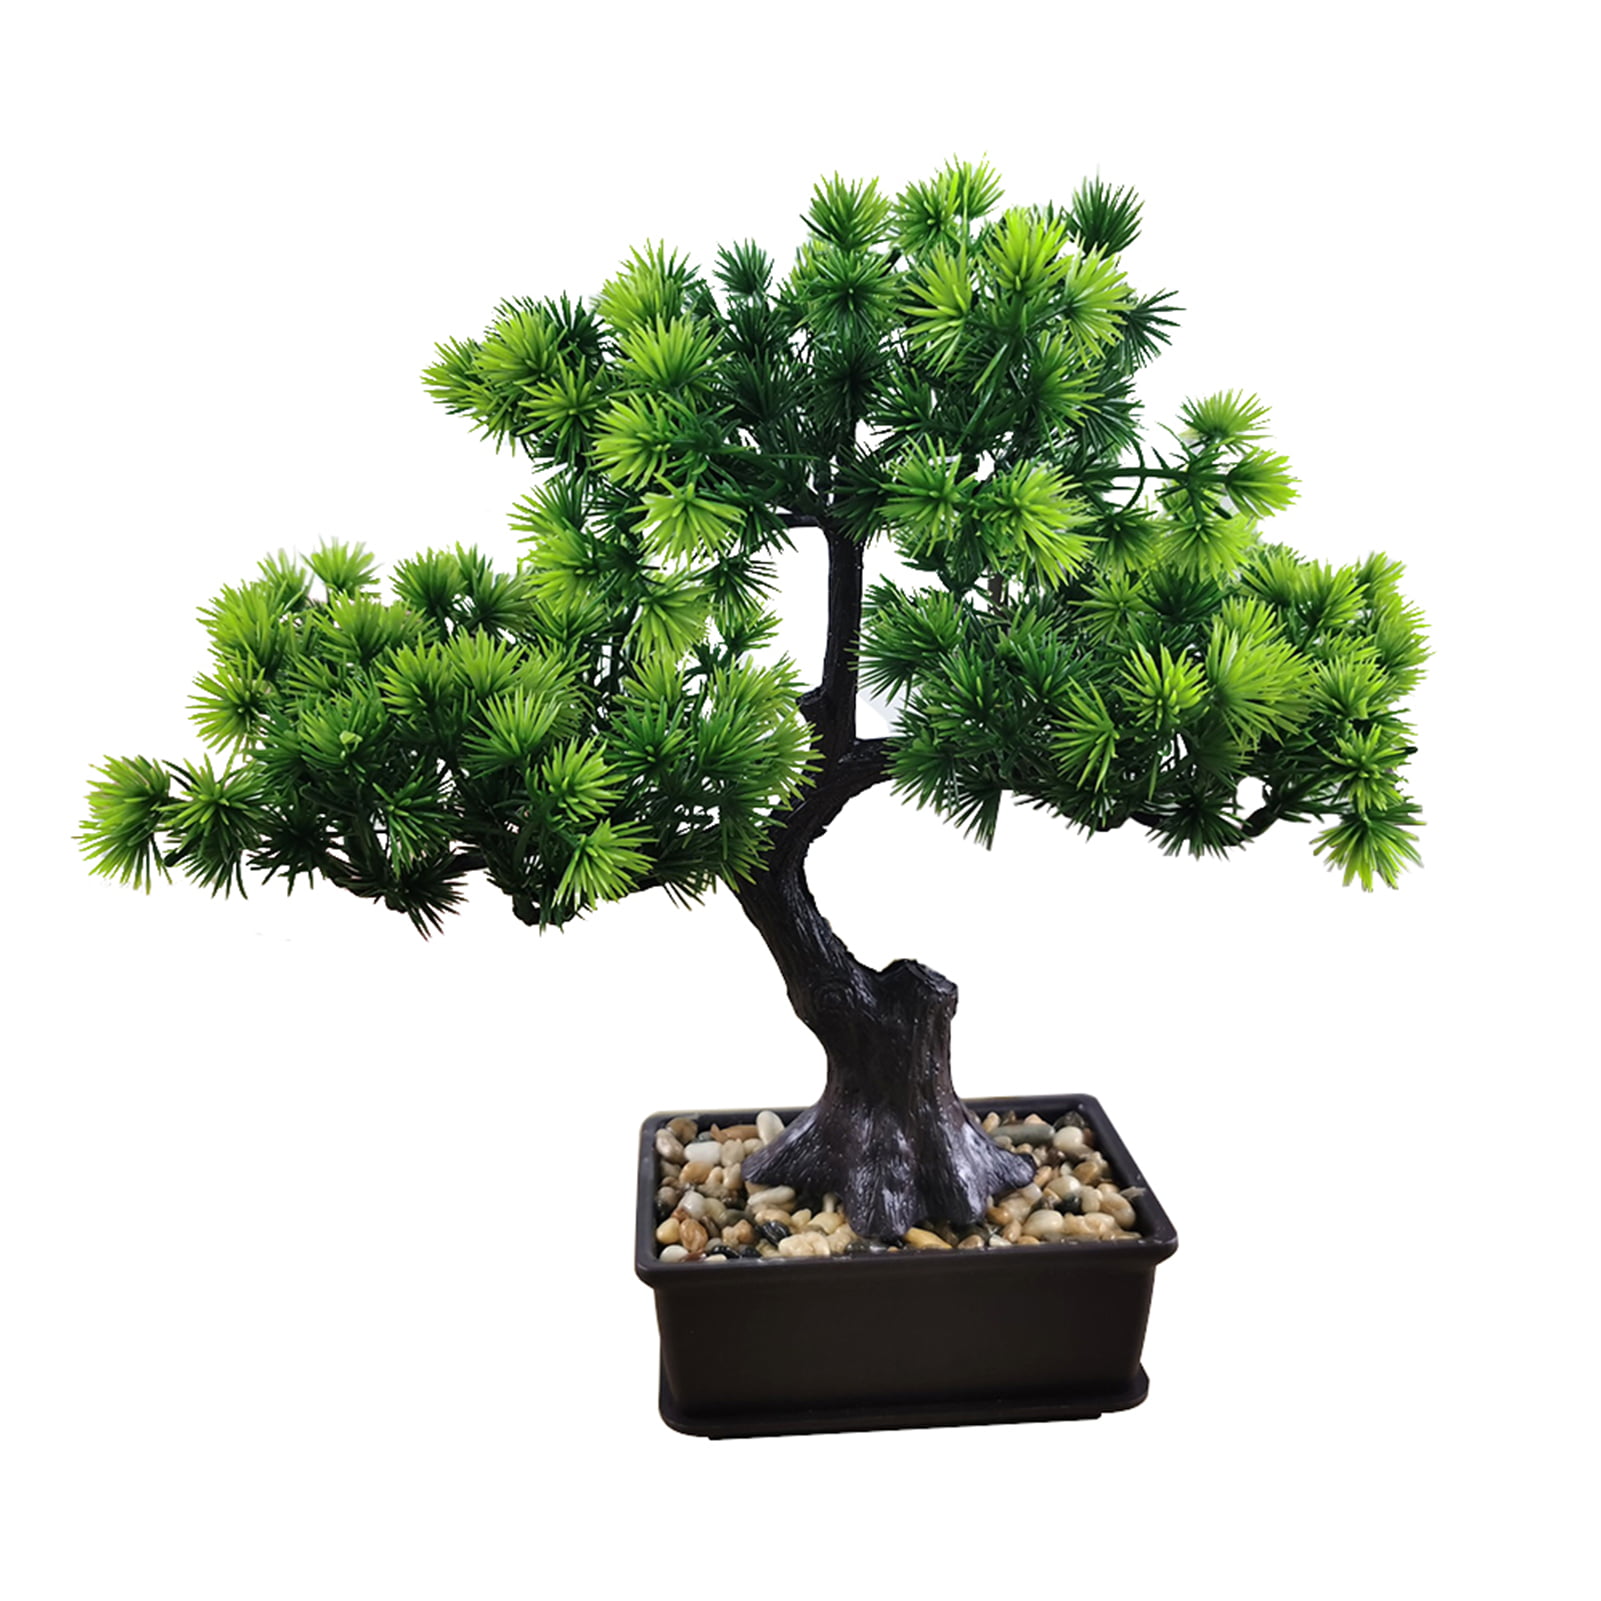 Details about   Artificial Fake Plant Bonsai Potted Simulation Pine Tree Home Office Decor Gift